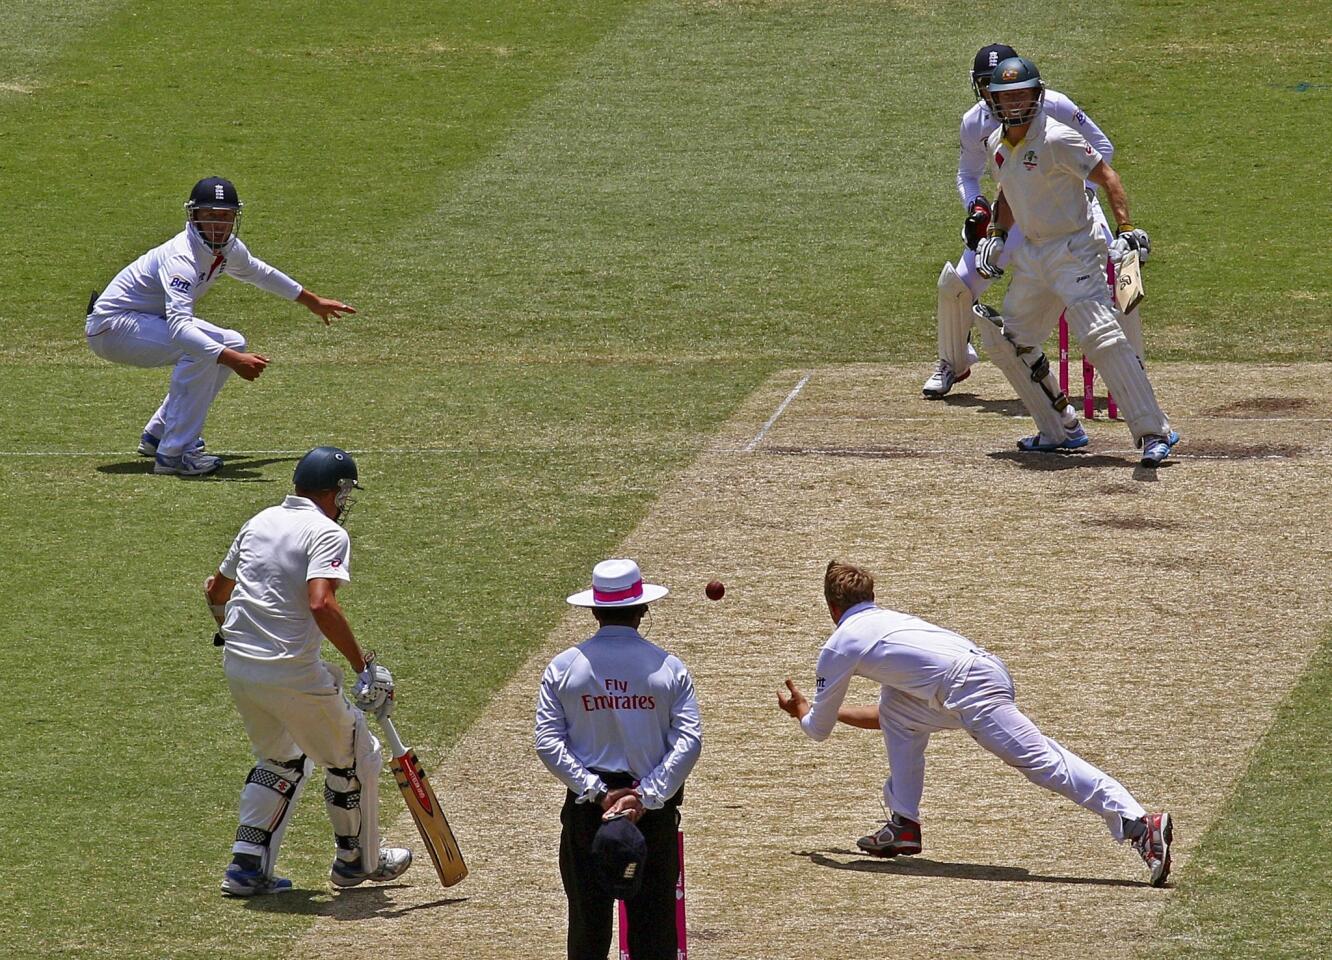 A cricket match between England and Australia at the Sydney Cricket Ground on Jan. 5, 2014.